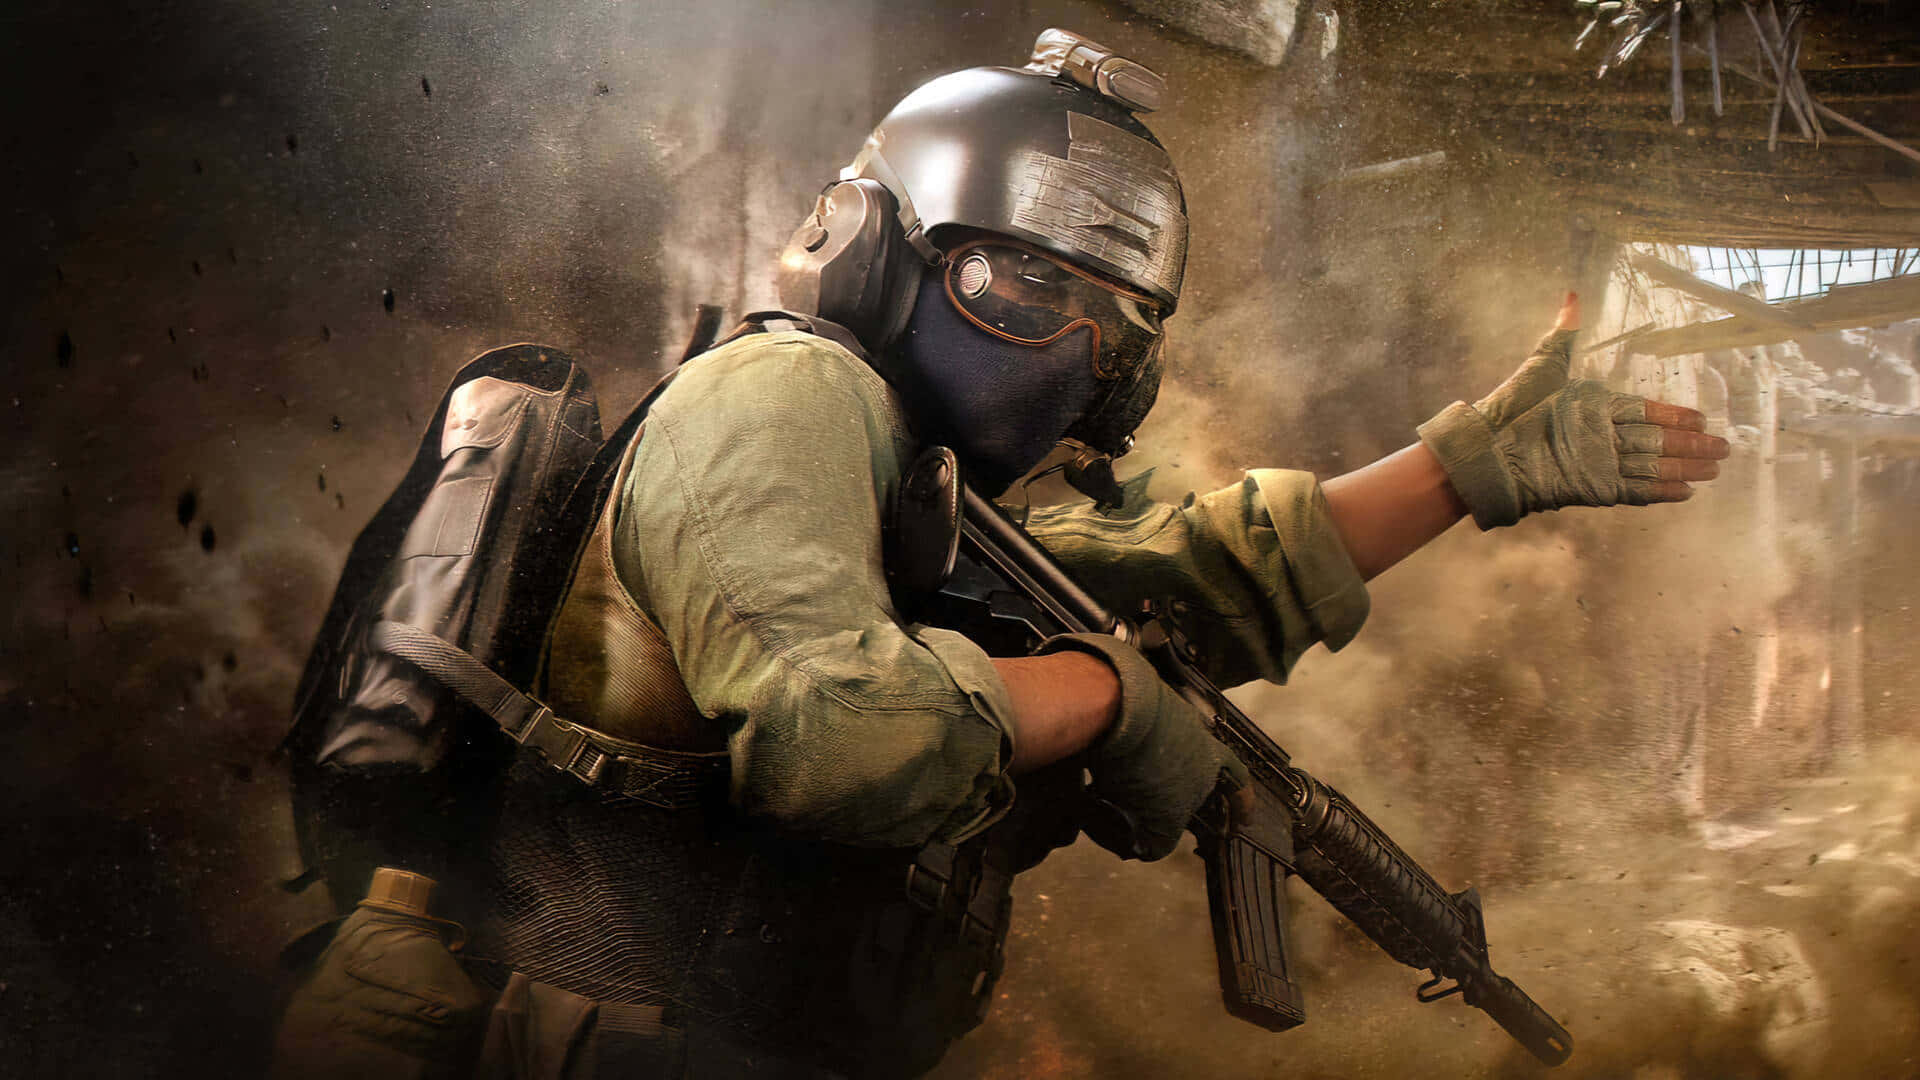 a soldier is holding a gun in a dusty environment